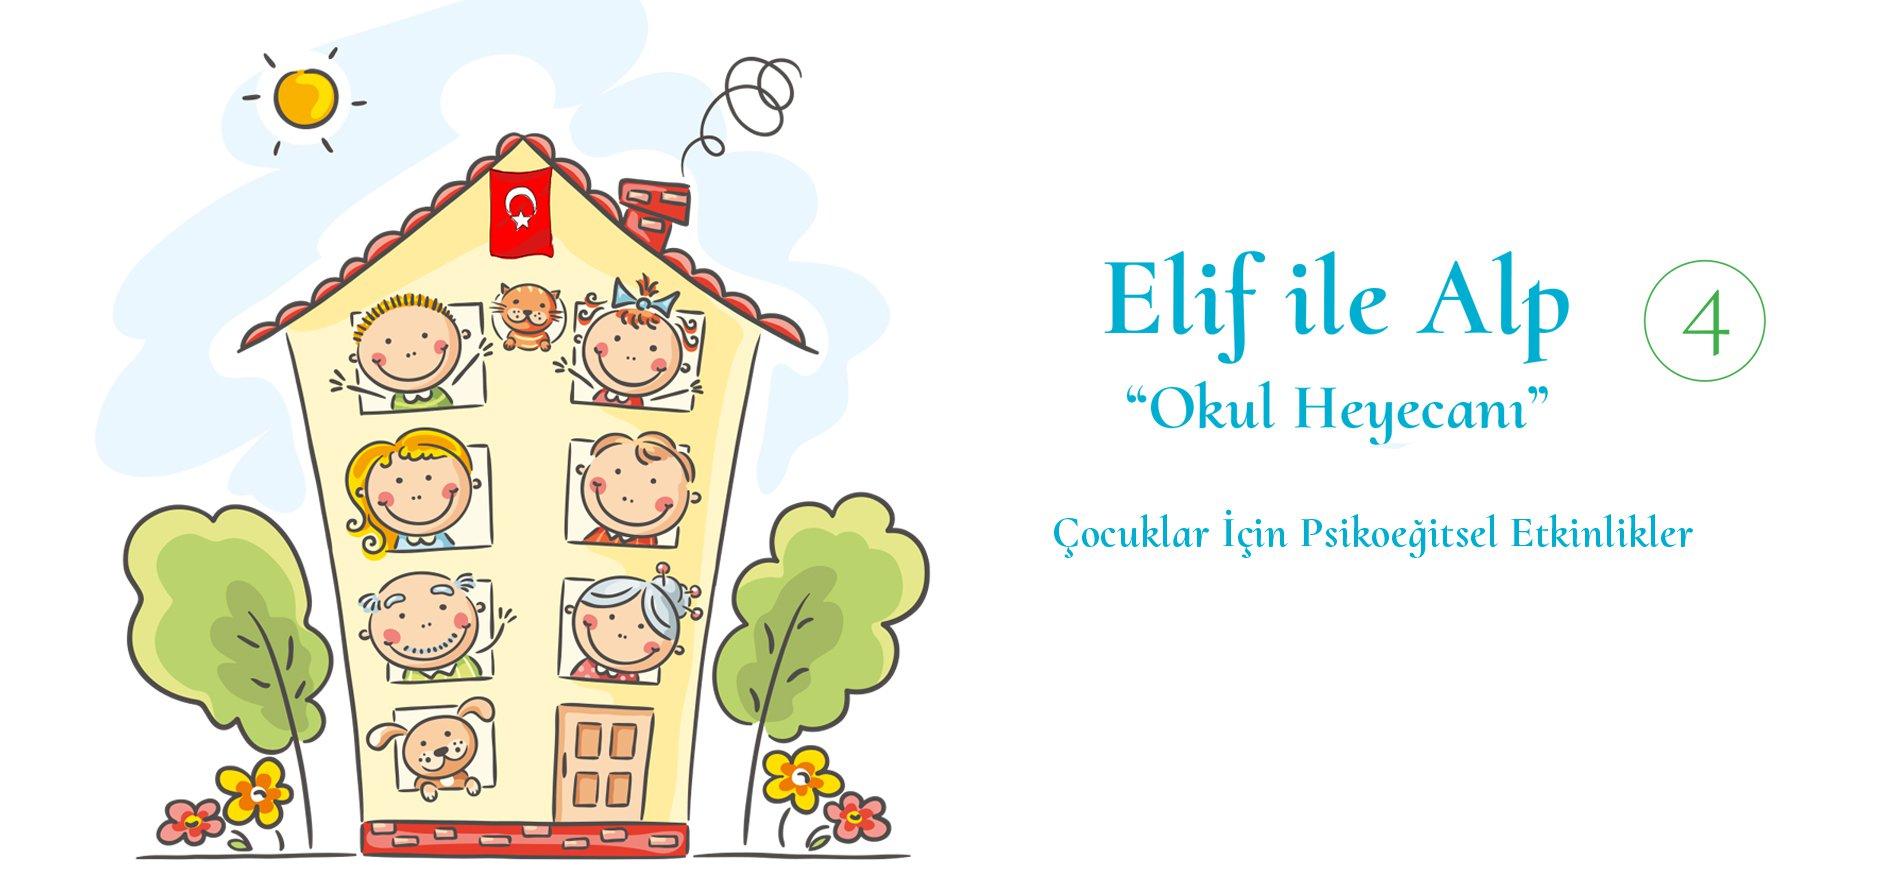 ELİF AND ALP- THREE BOOK SERIES OFFERED TO STUDENTS DURING THE PANDEMIC NOW GIVES WAY TO 